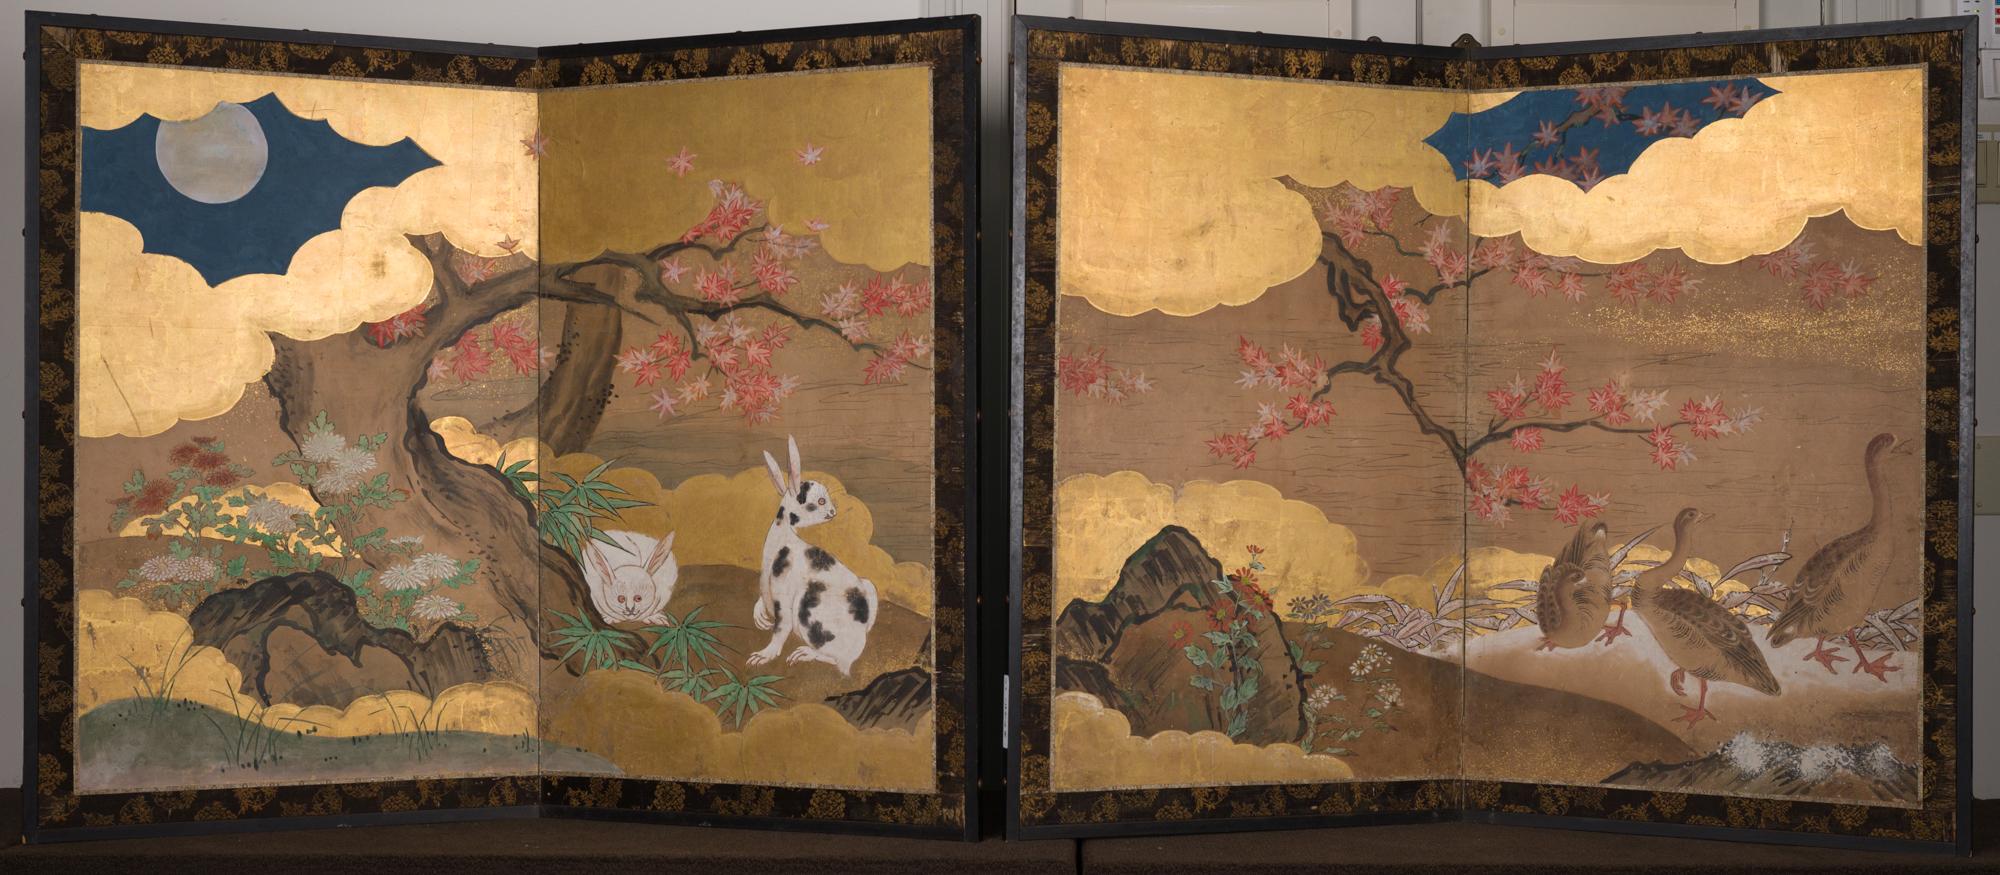 Screen A: Autumn Scene with Geese in a Gentle Landscape. Lovely painting depicting geese under maple, in a gentle water landscape. Mineral pigments on paper with gold leaf clouds. 
Screen B: Autumn Scene with Rabbits Under Maple in the Moonlight.